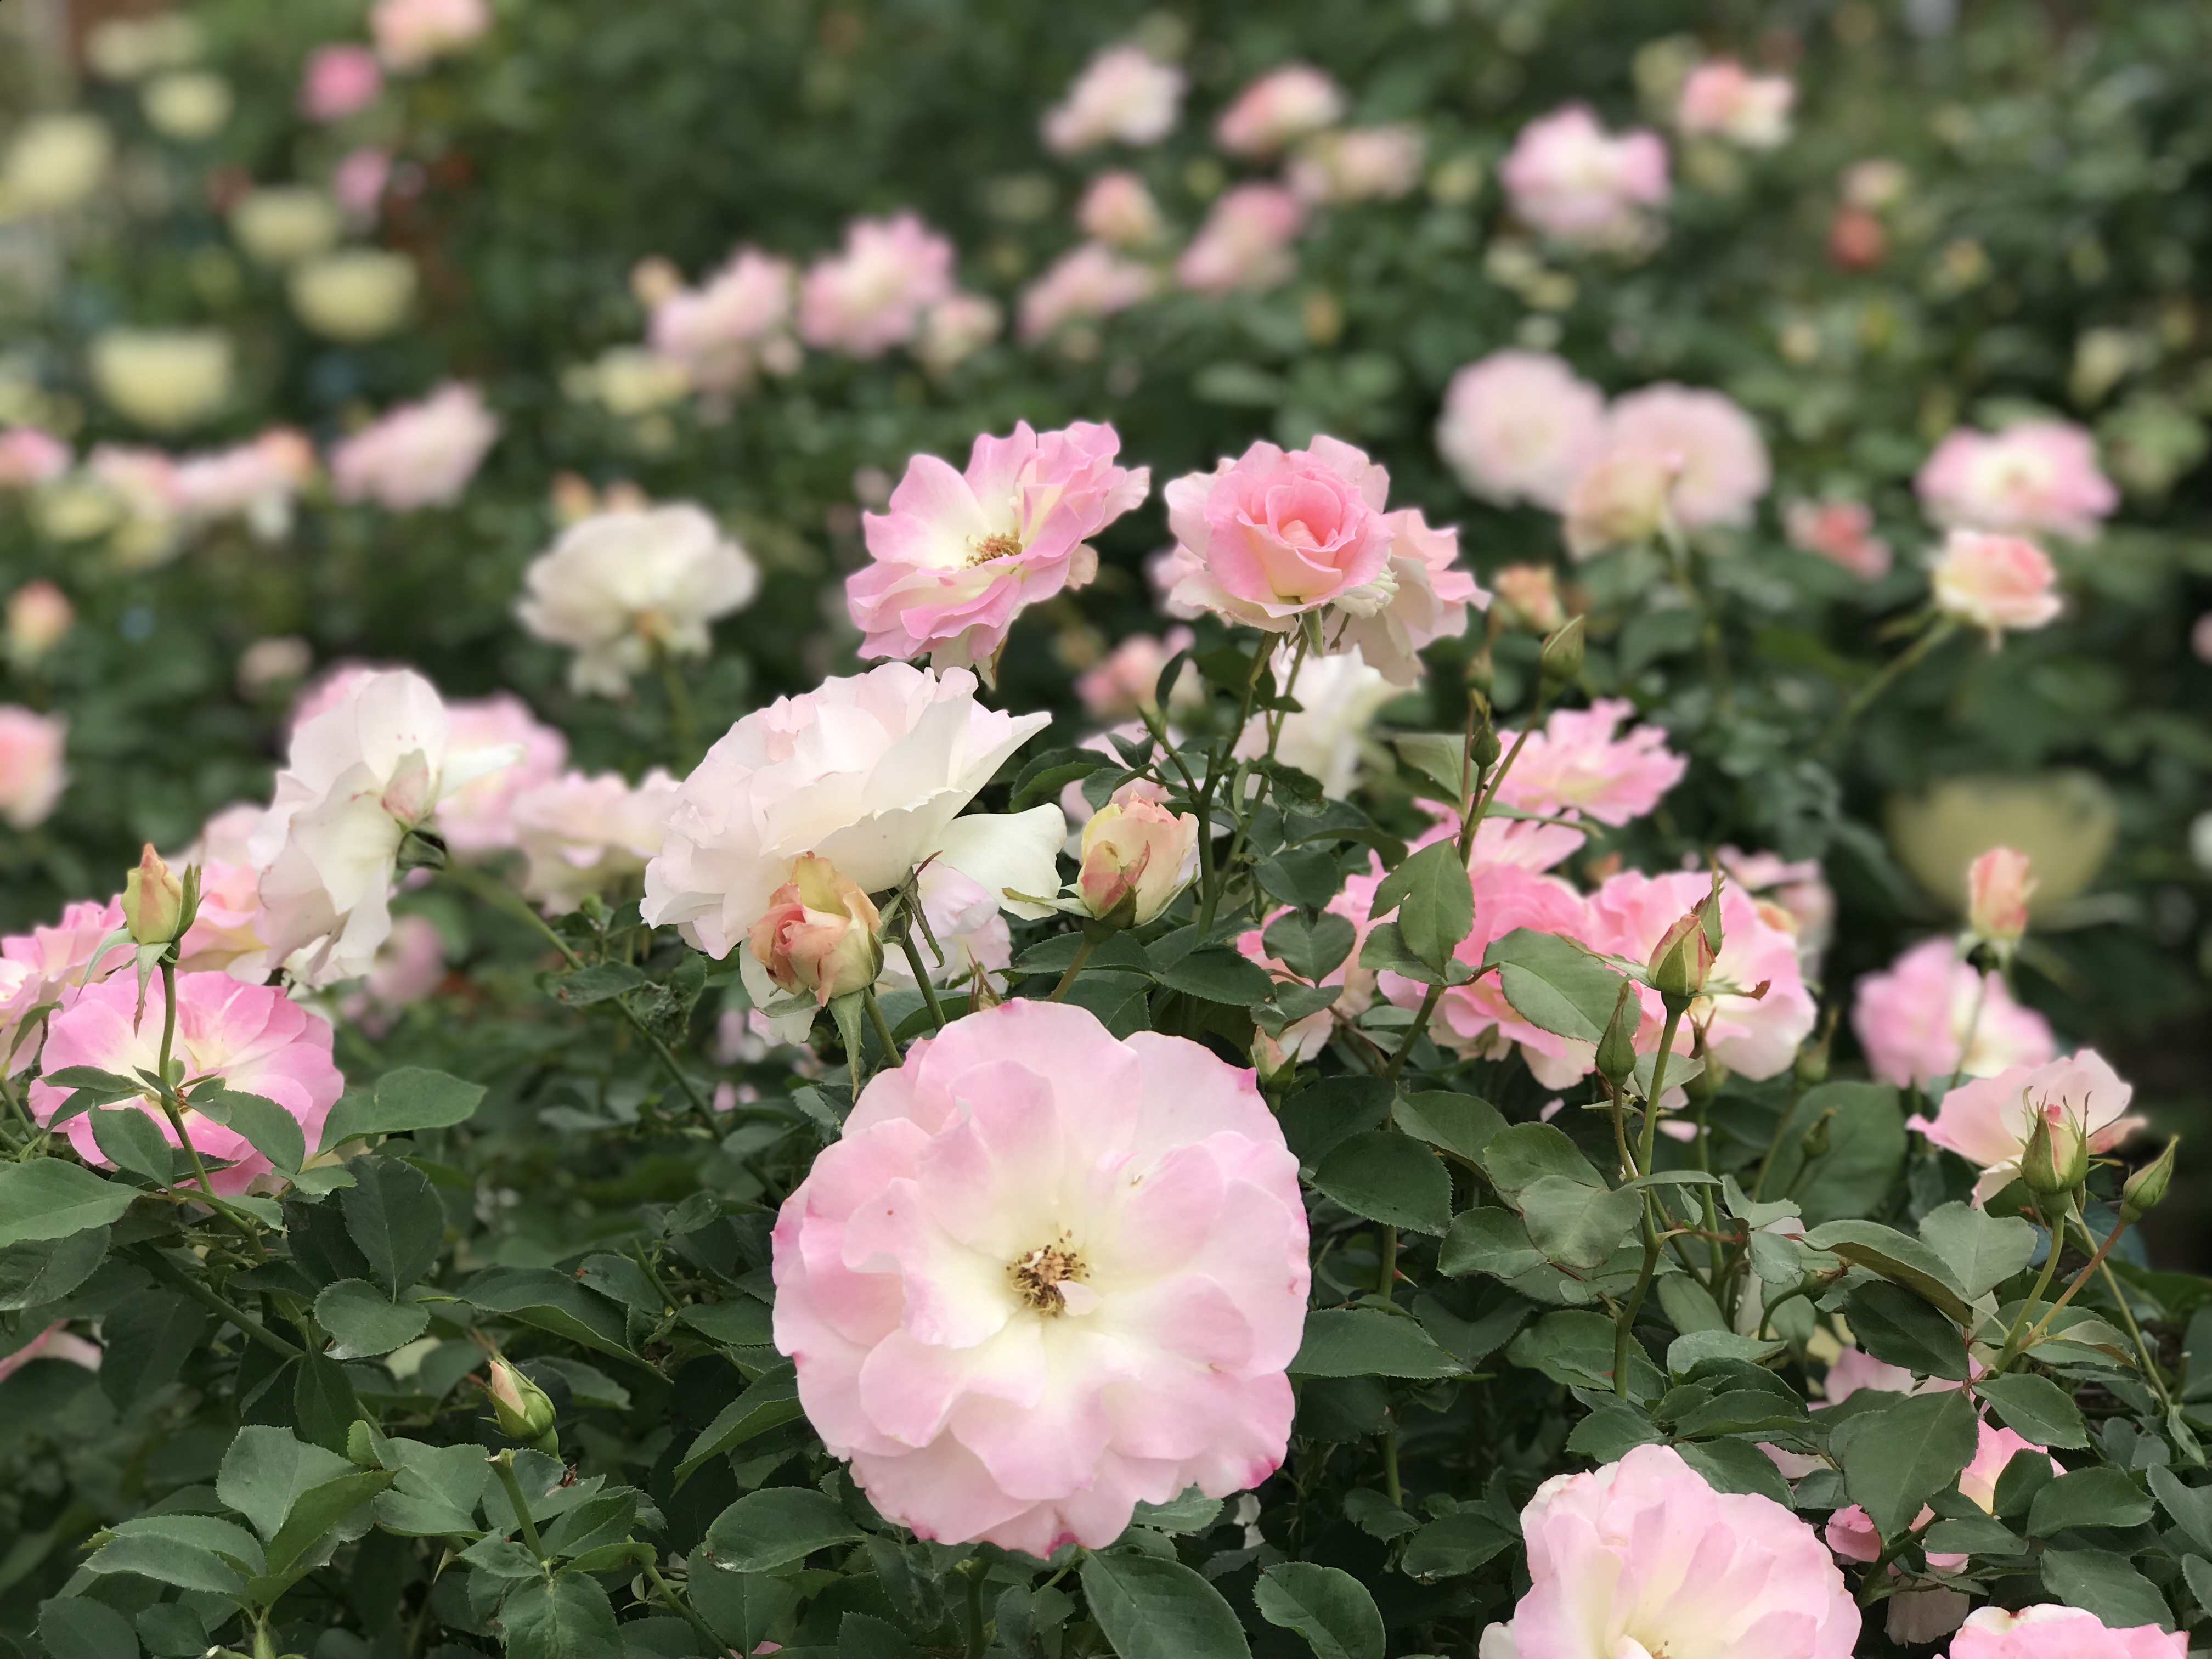 [Roses] 2,500 roses of 500 varieties make the garden gorgeous. The softly scented floral fragrance is soothing